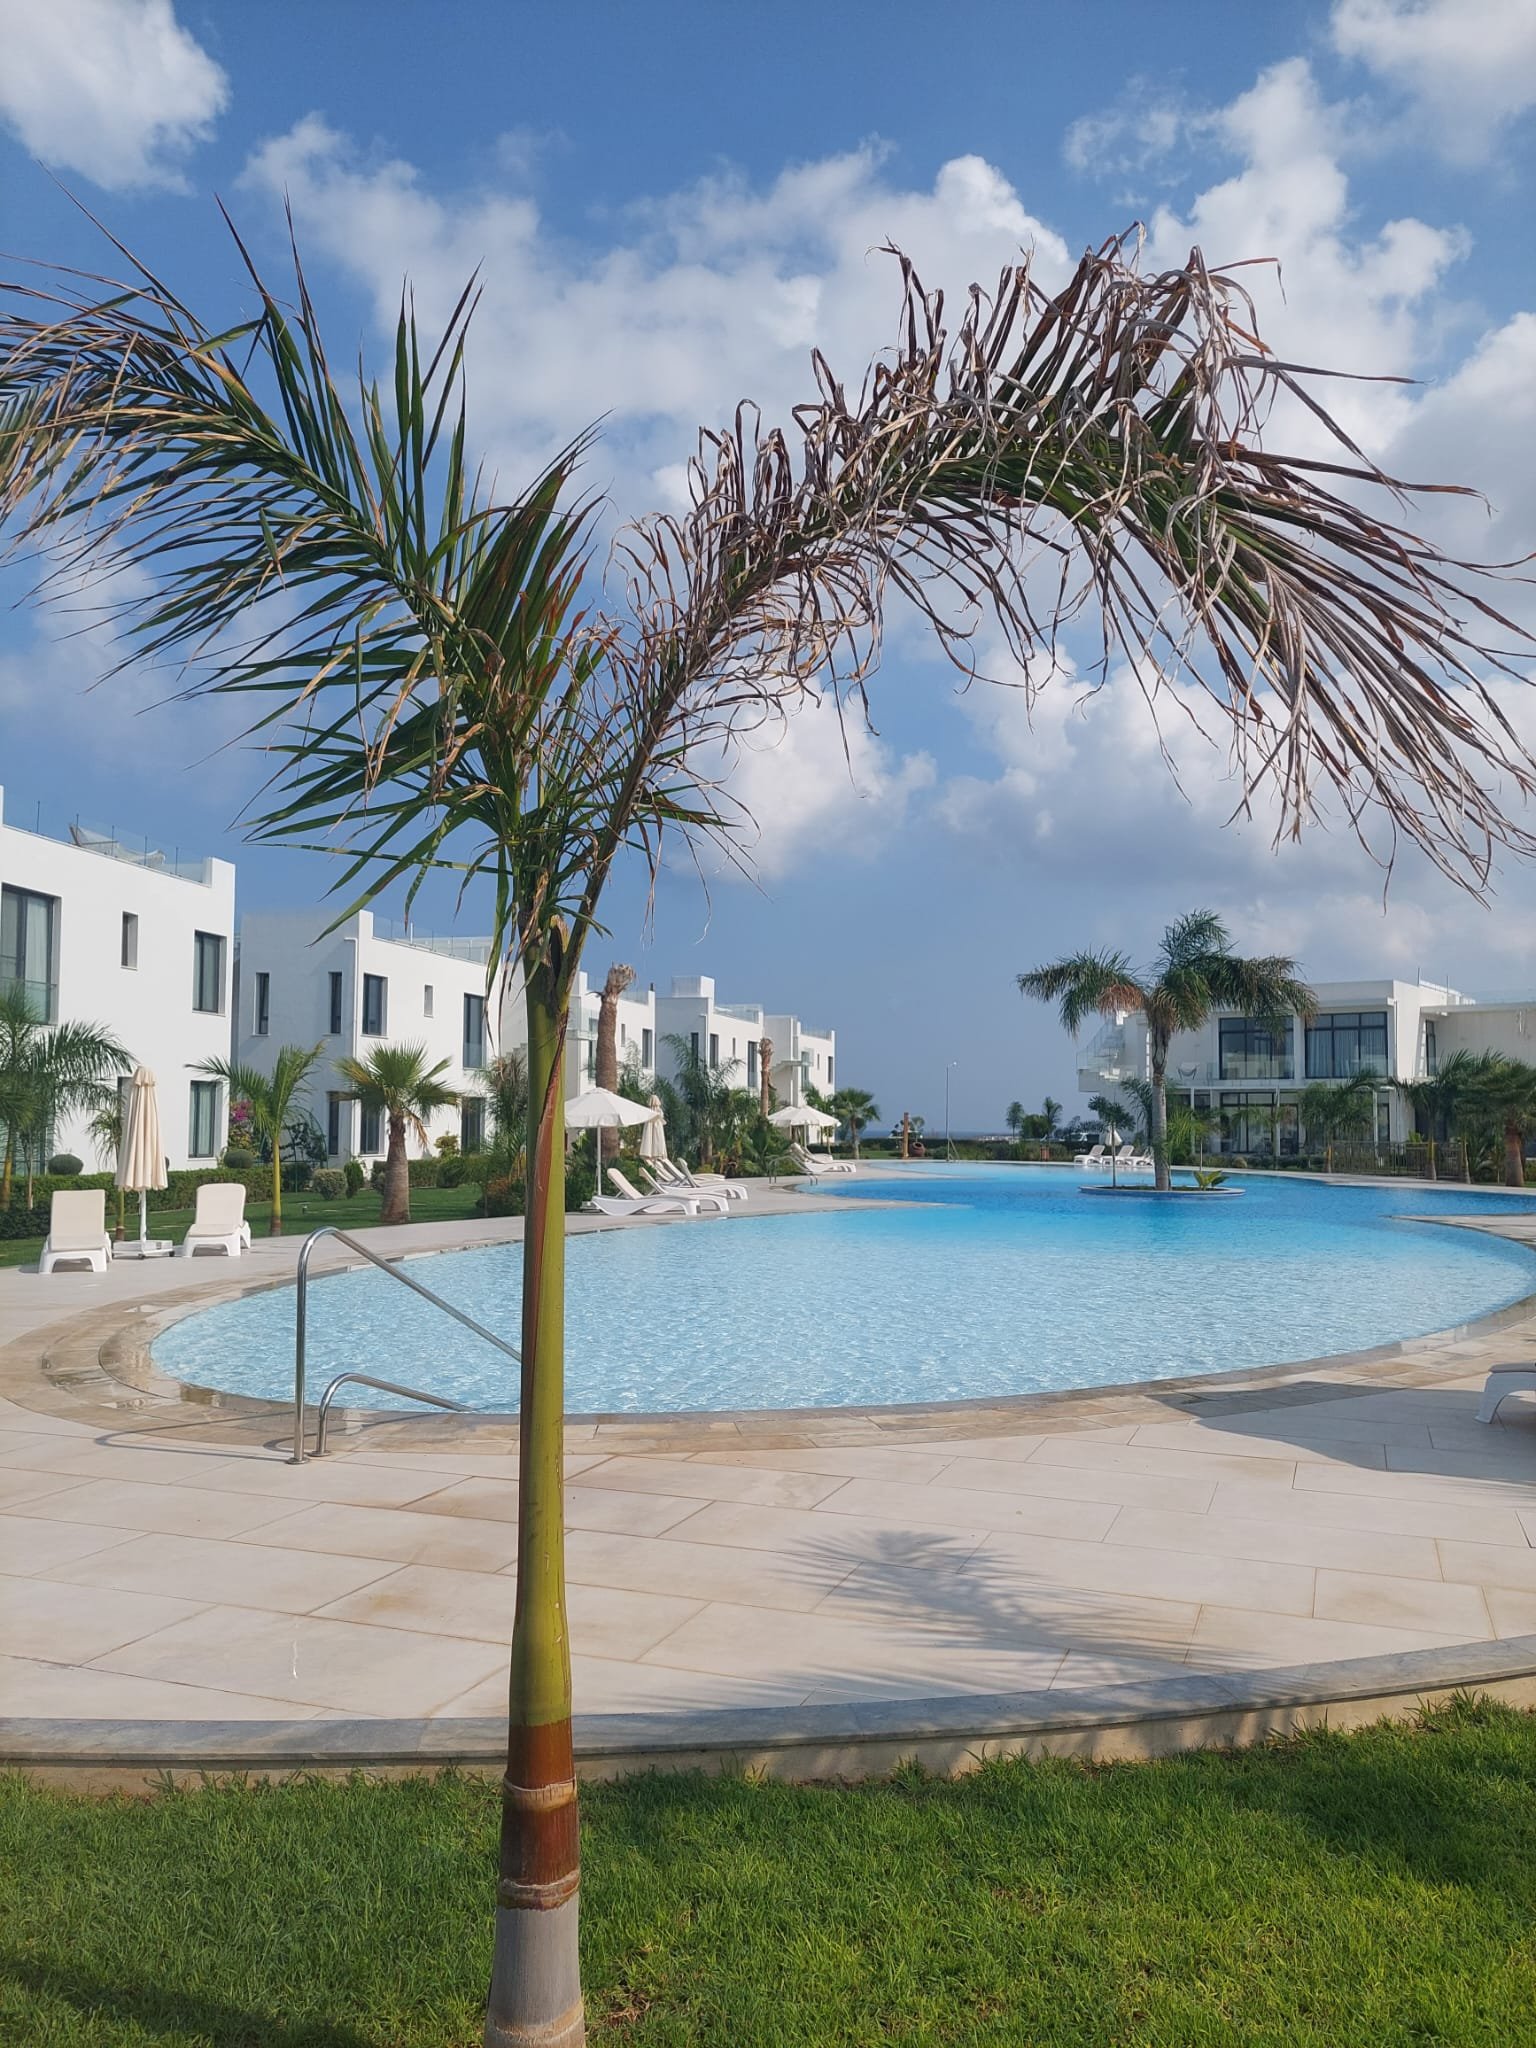 Don't Miss the Holiday Home Opportunity in Esentepede-09afc288-7b3e-4a62-9986-6801c121500d